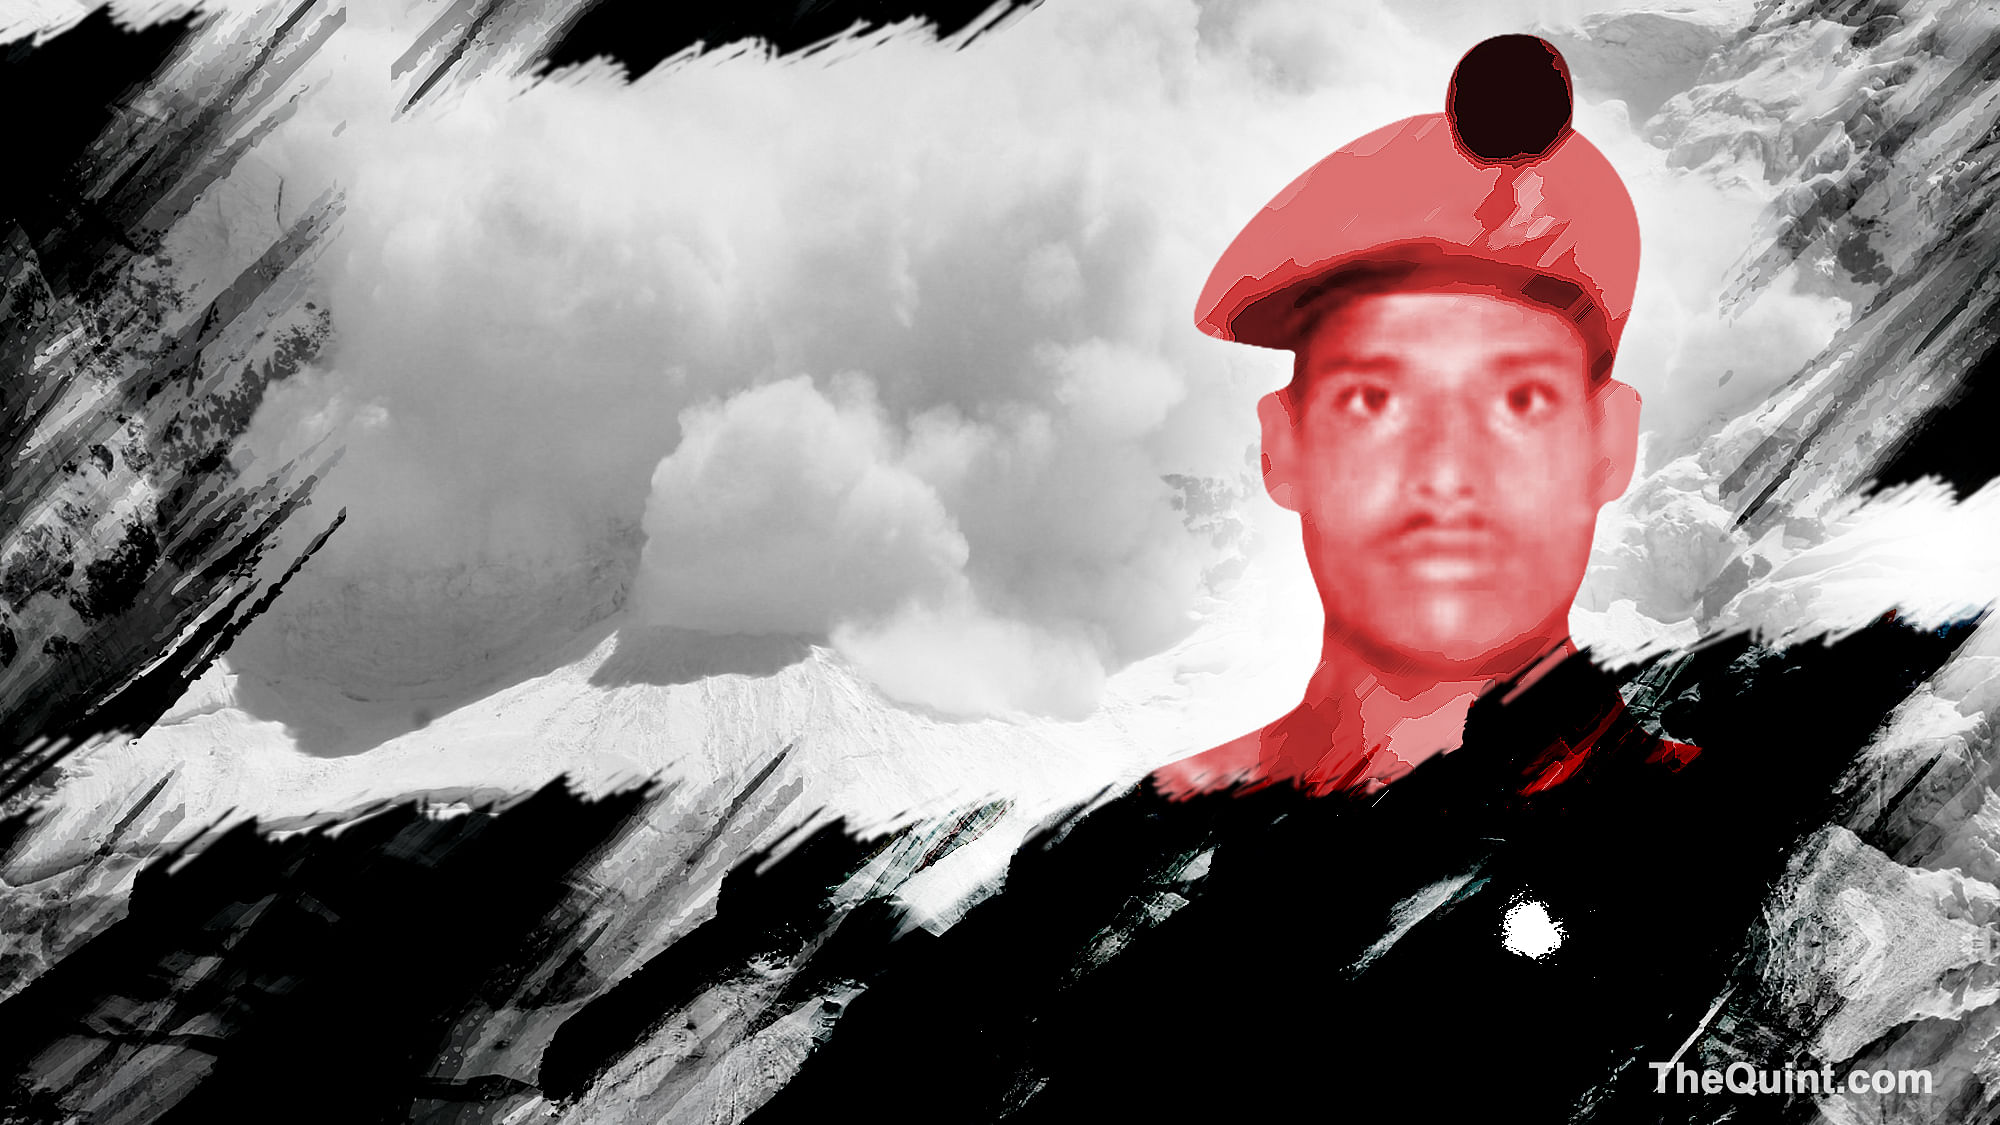 Lance Naik Hanamanthappa found alive after Siachen avalanche accident. (Photo: Hardeep Singh/<b>The Quint</b>)